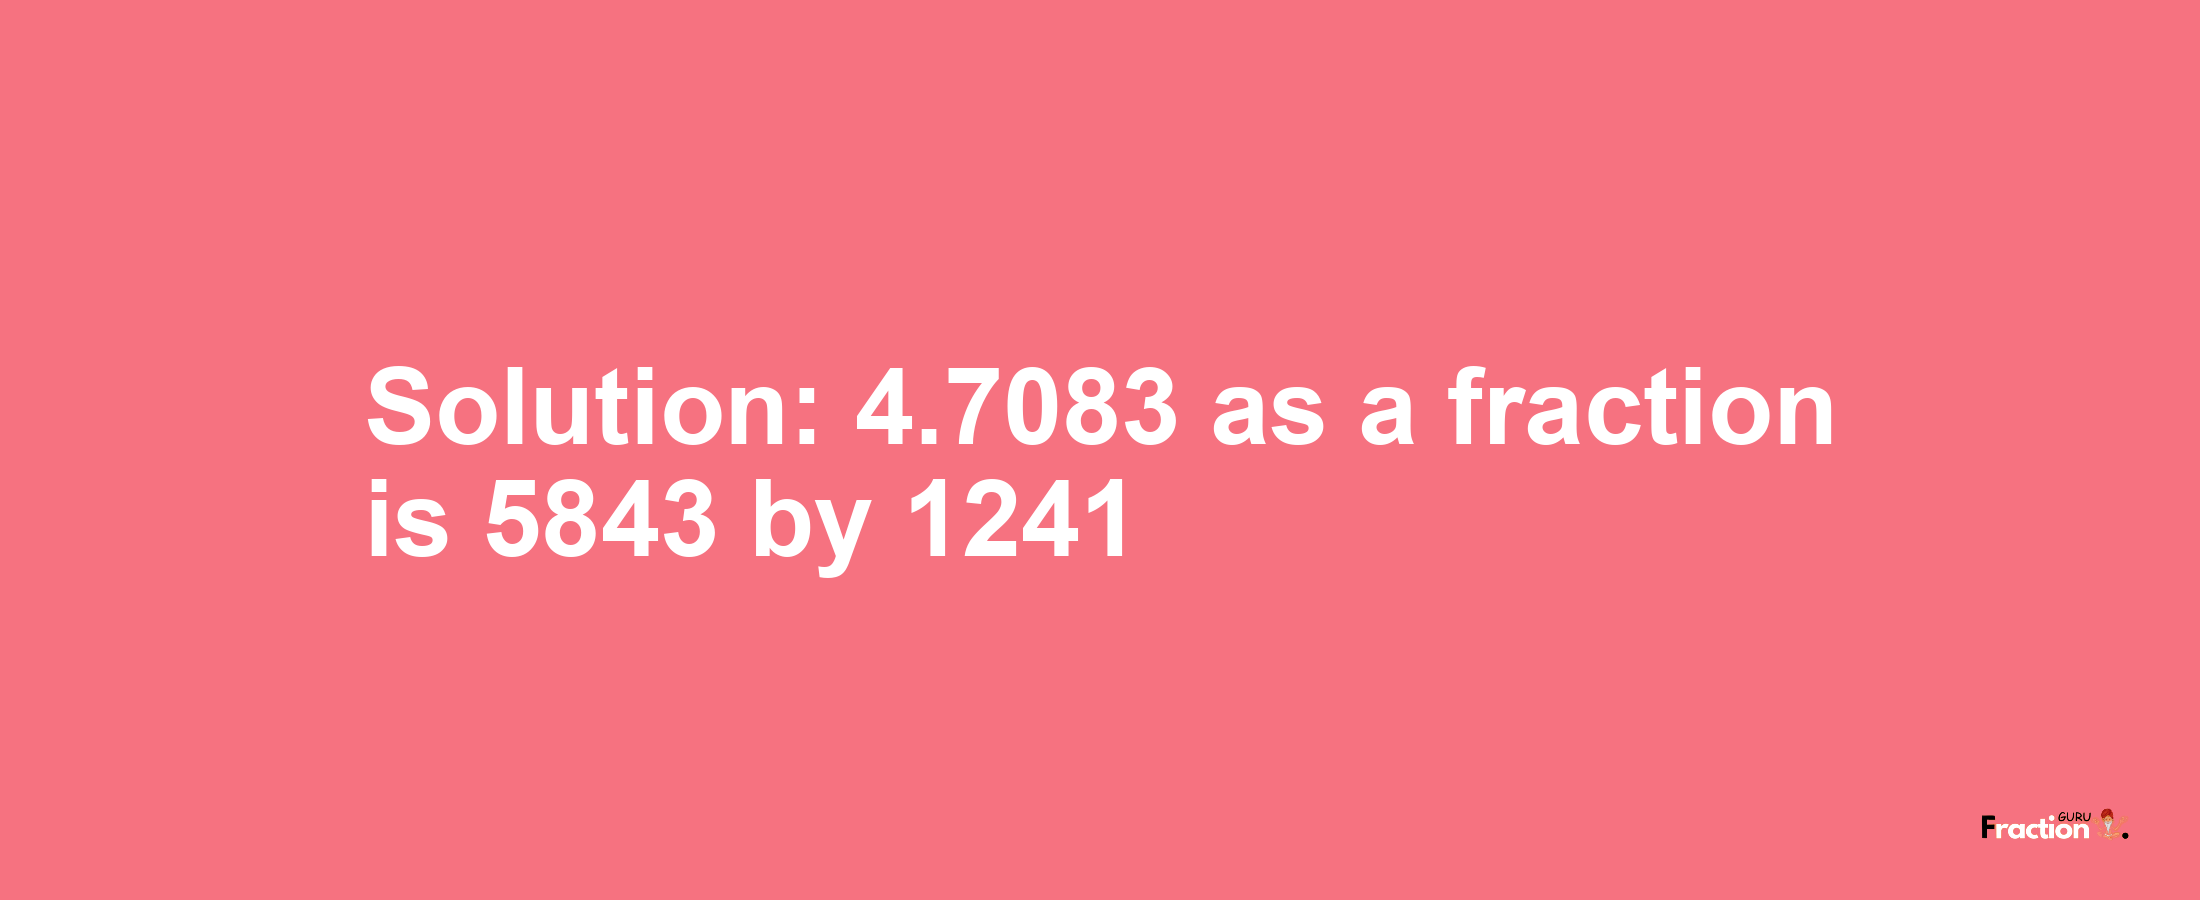 Solution:4.7083 as a fraction is 5843/1241